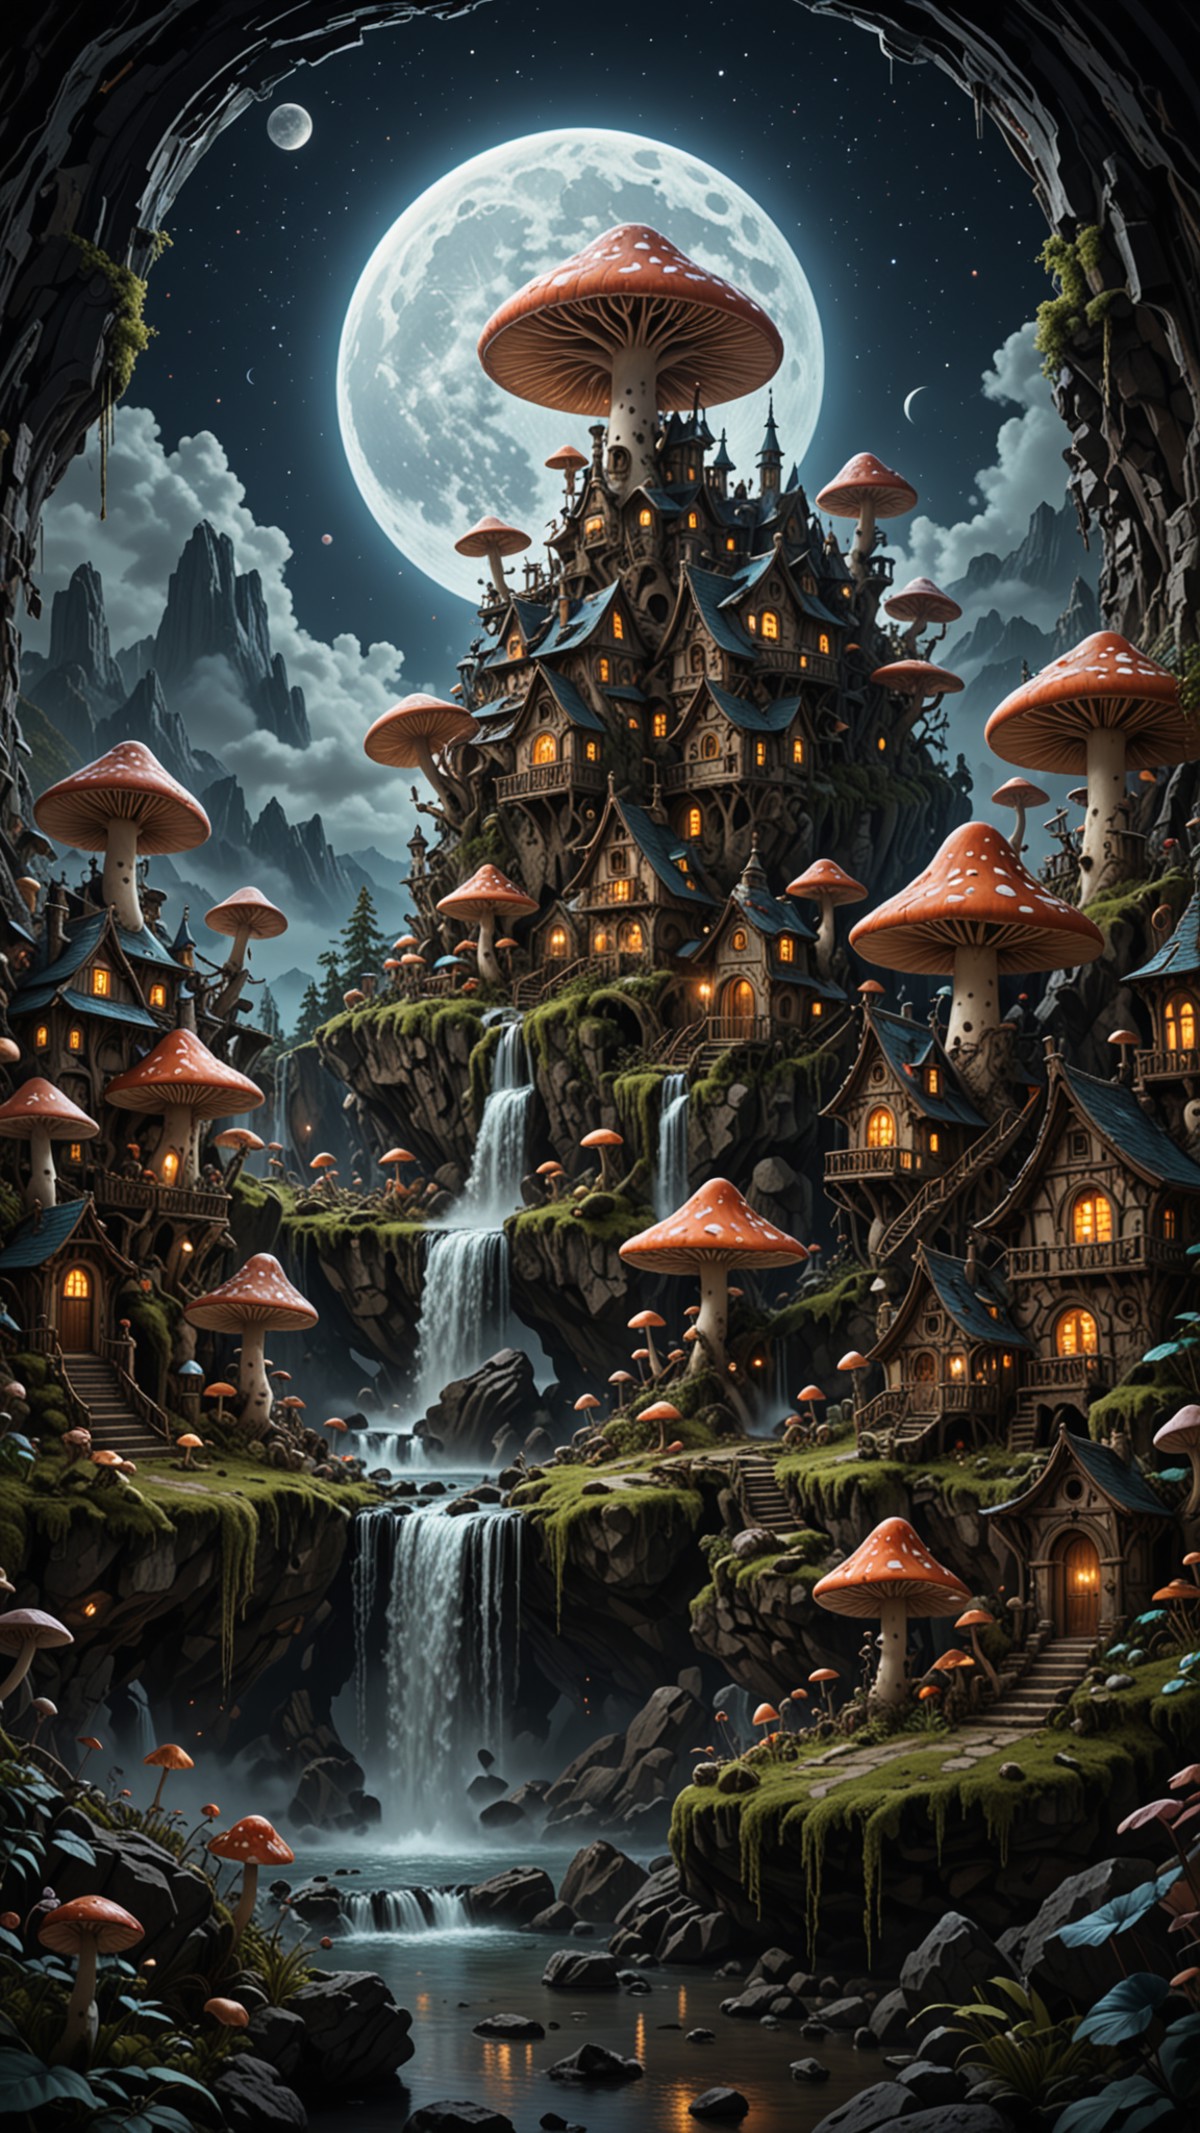 Huge Mushroom Village, houses, at Night, moon, Large waterfall, magnificent, celestial, ethereal, painterly, epic, majesti...